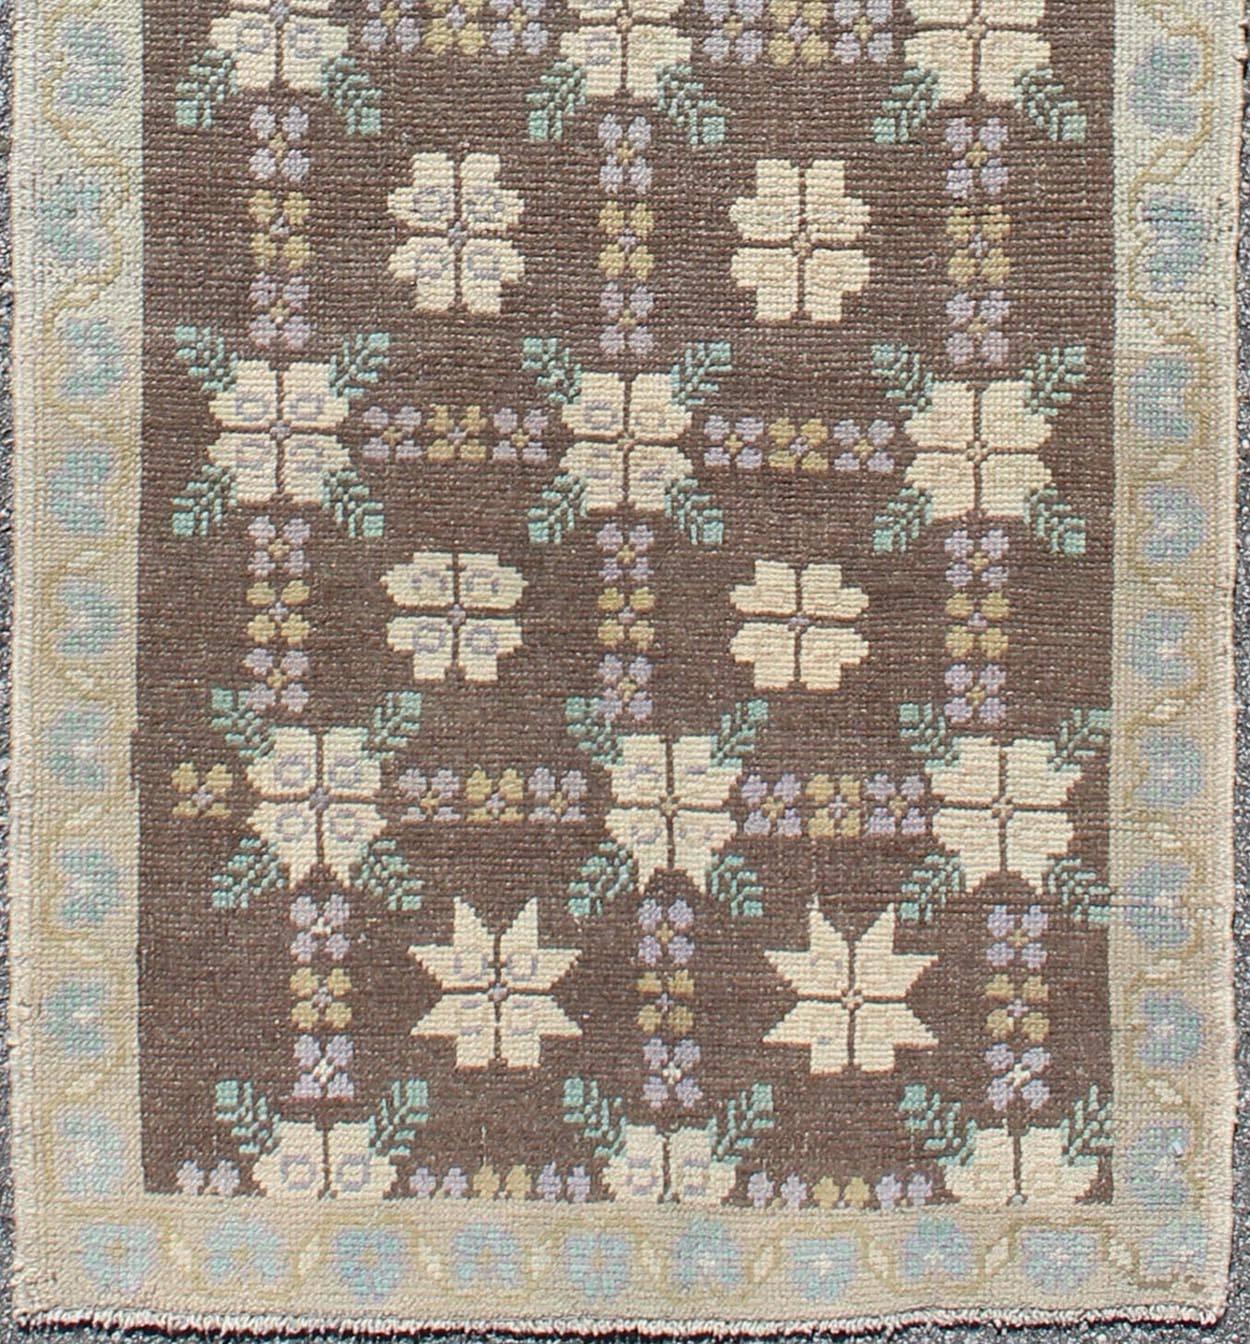 Vintage Turkish Oushak runner with gray and cream flower latticework design, rug en-140501, country of origin / type: Turkey / Tulu, circa 1940

This Oushak runner features cream and gray blossom motifs laid across a mocha brown field and